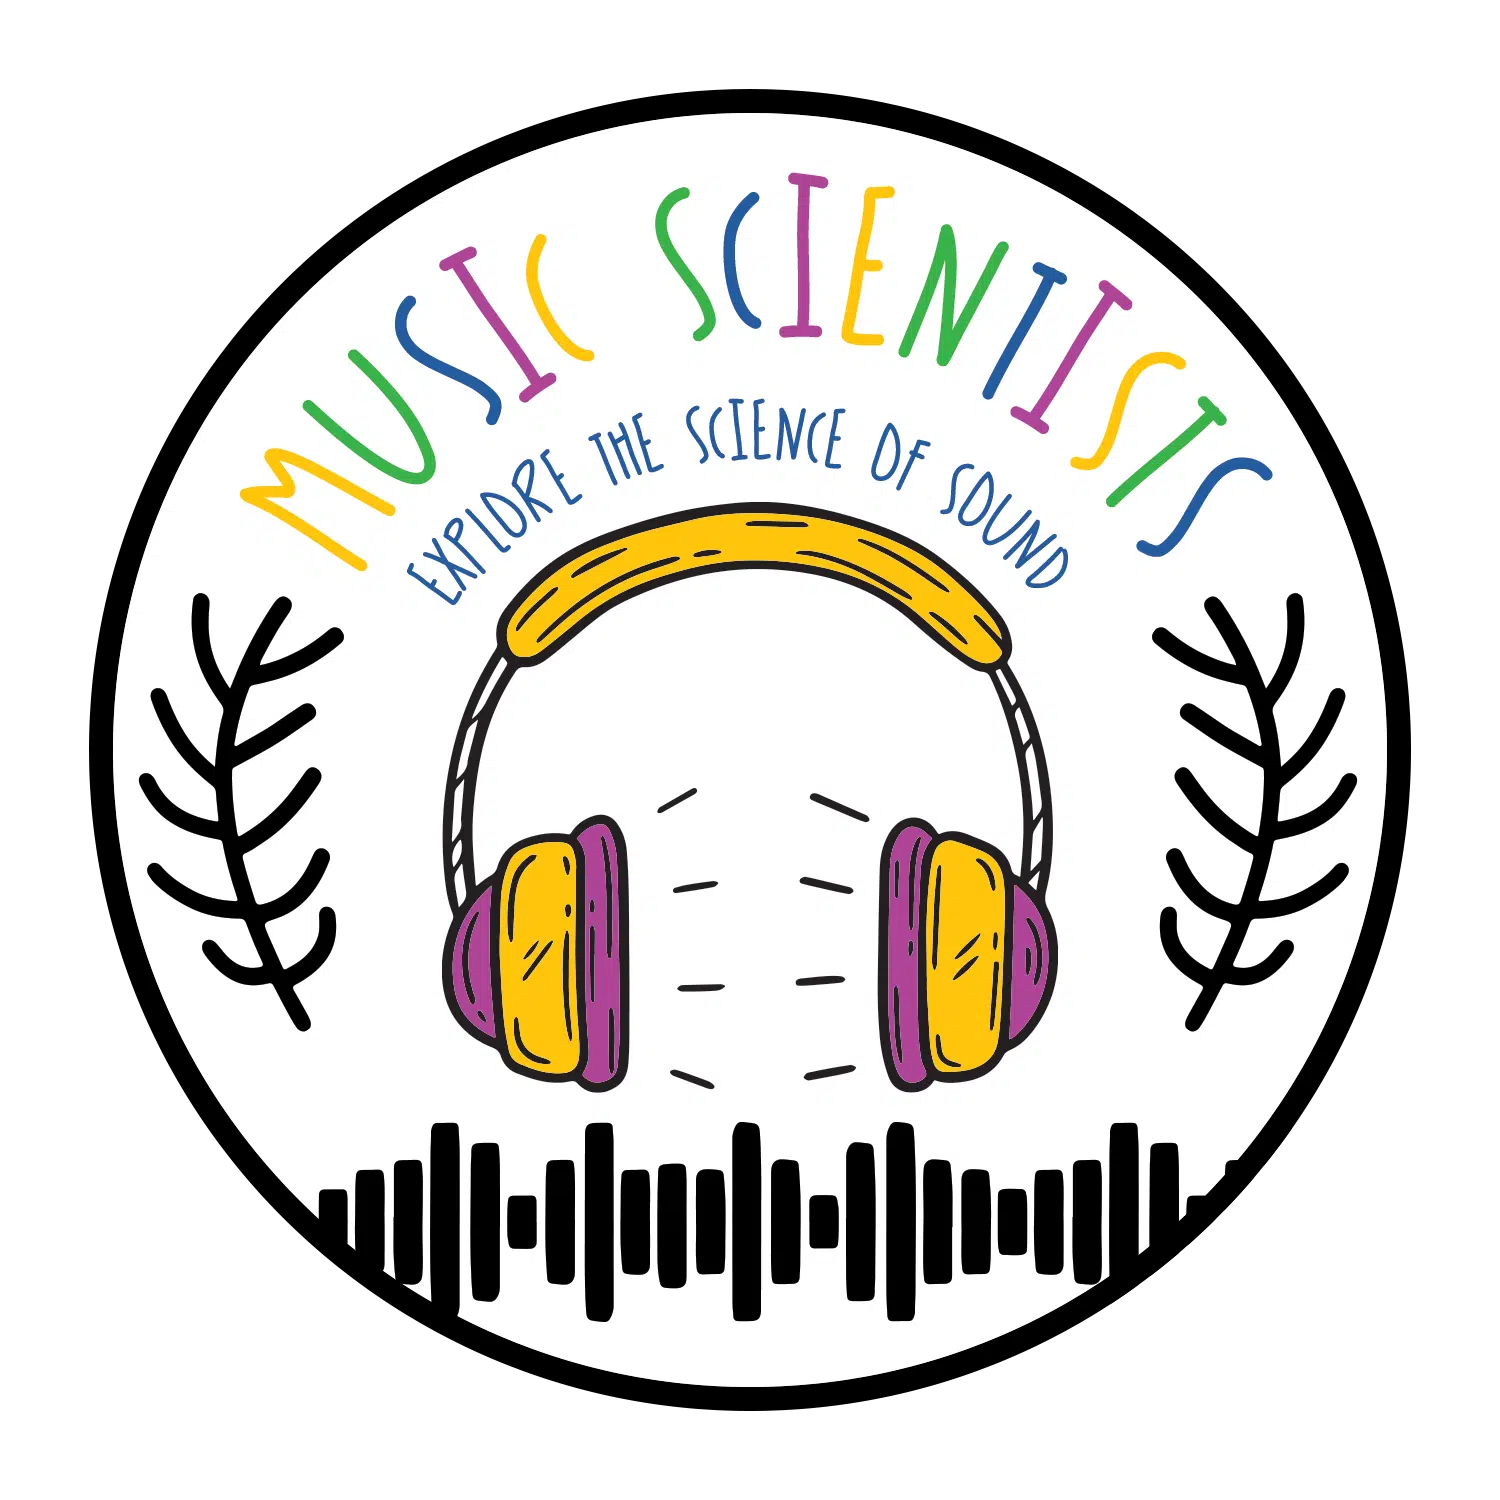 MusicScientists: Explore the Science of Sound*